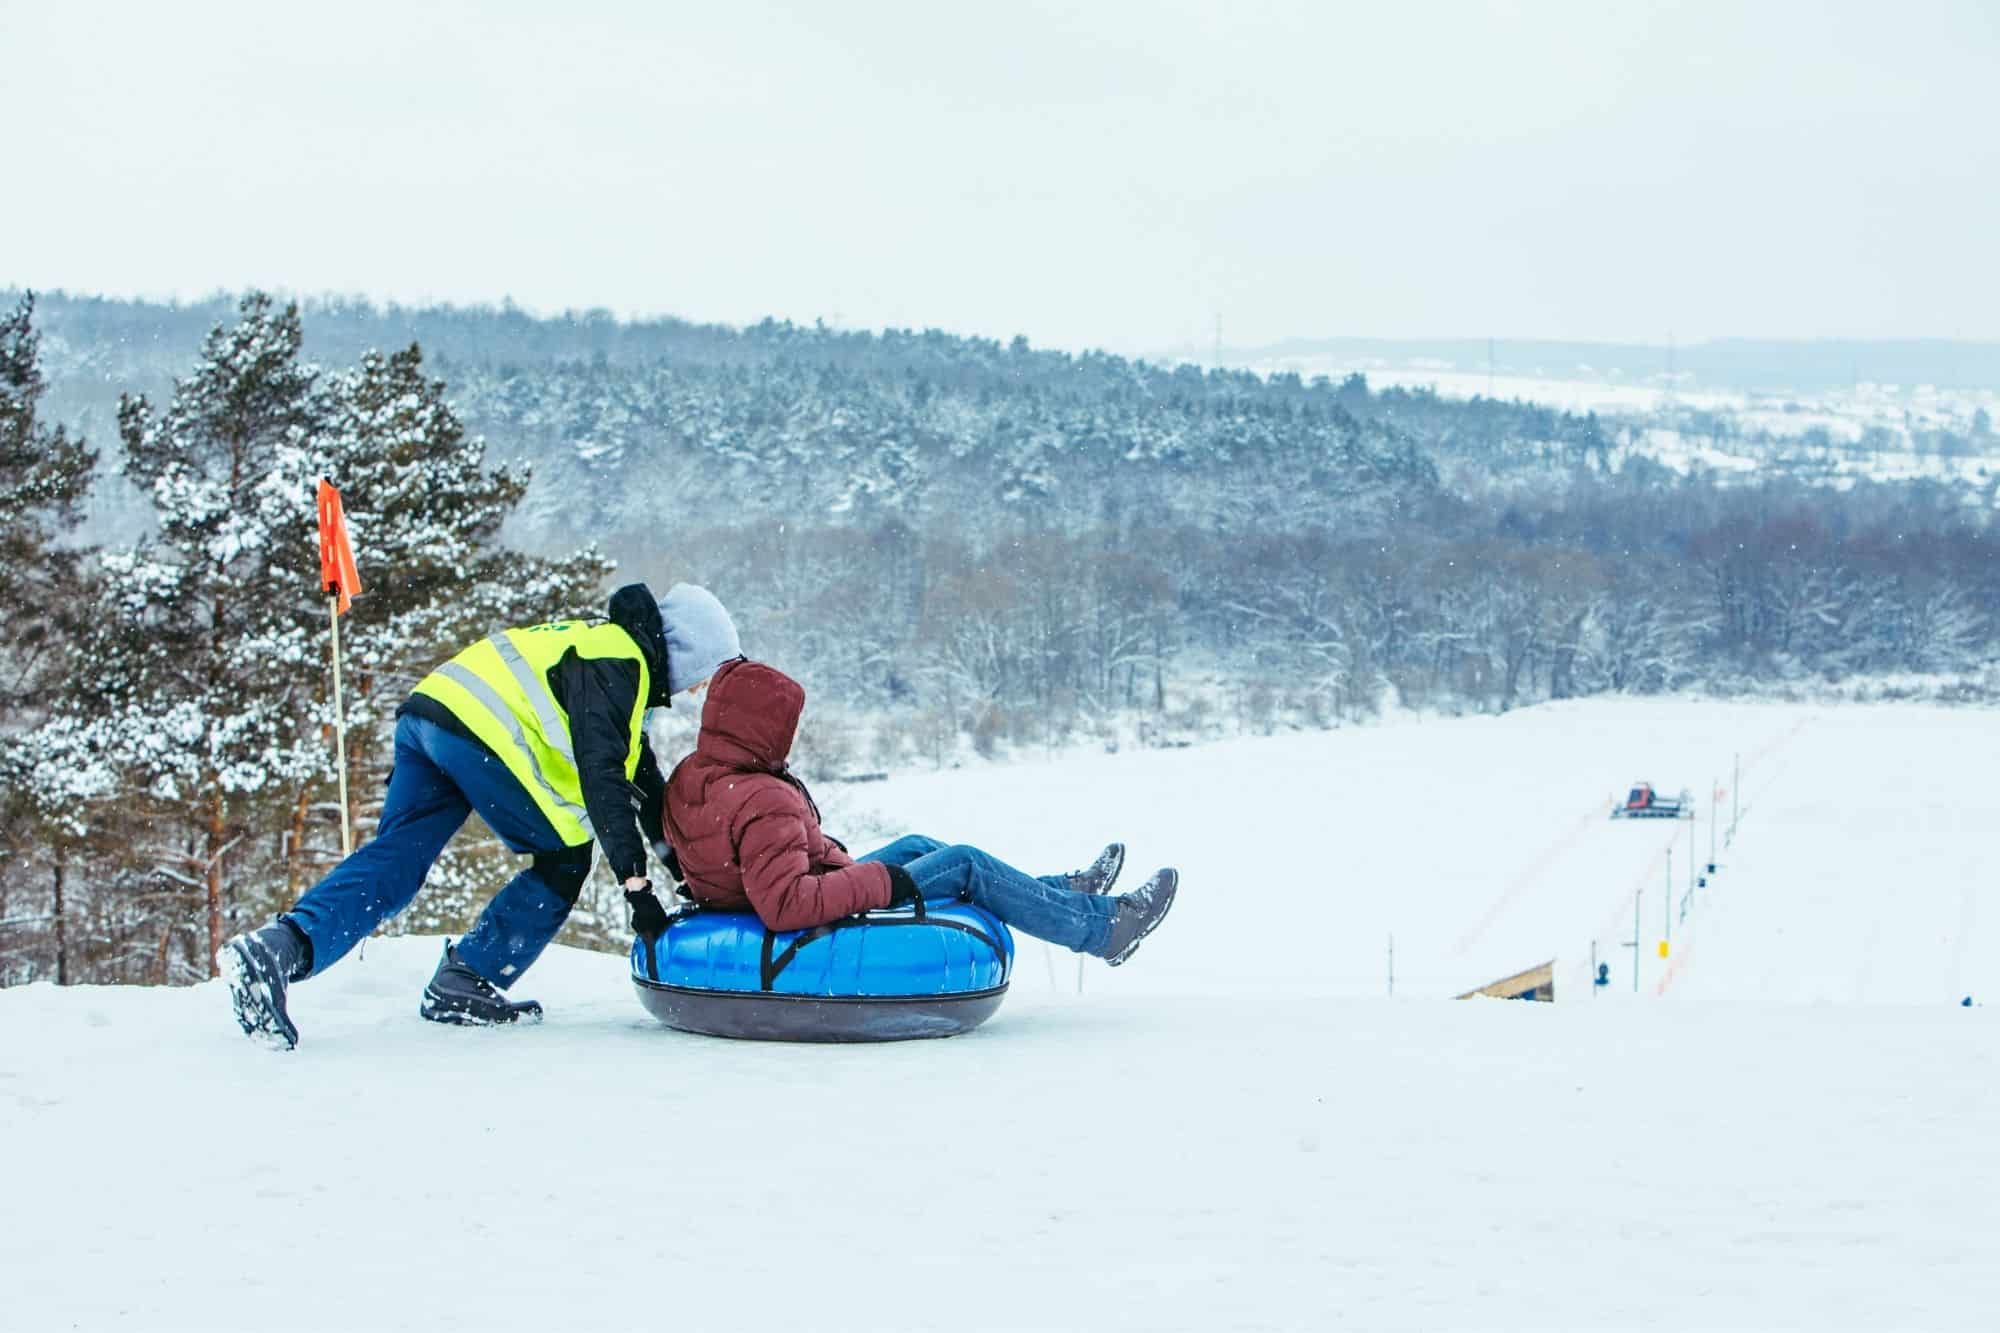 Child pushing another child on an inner tube on snow